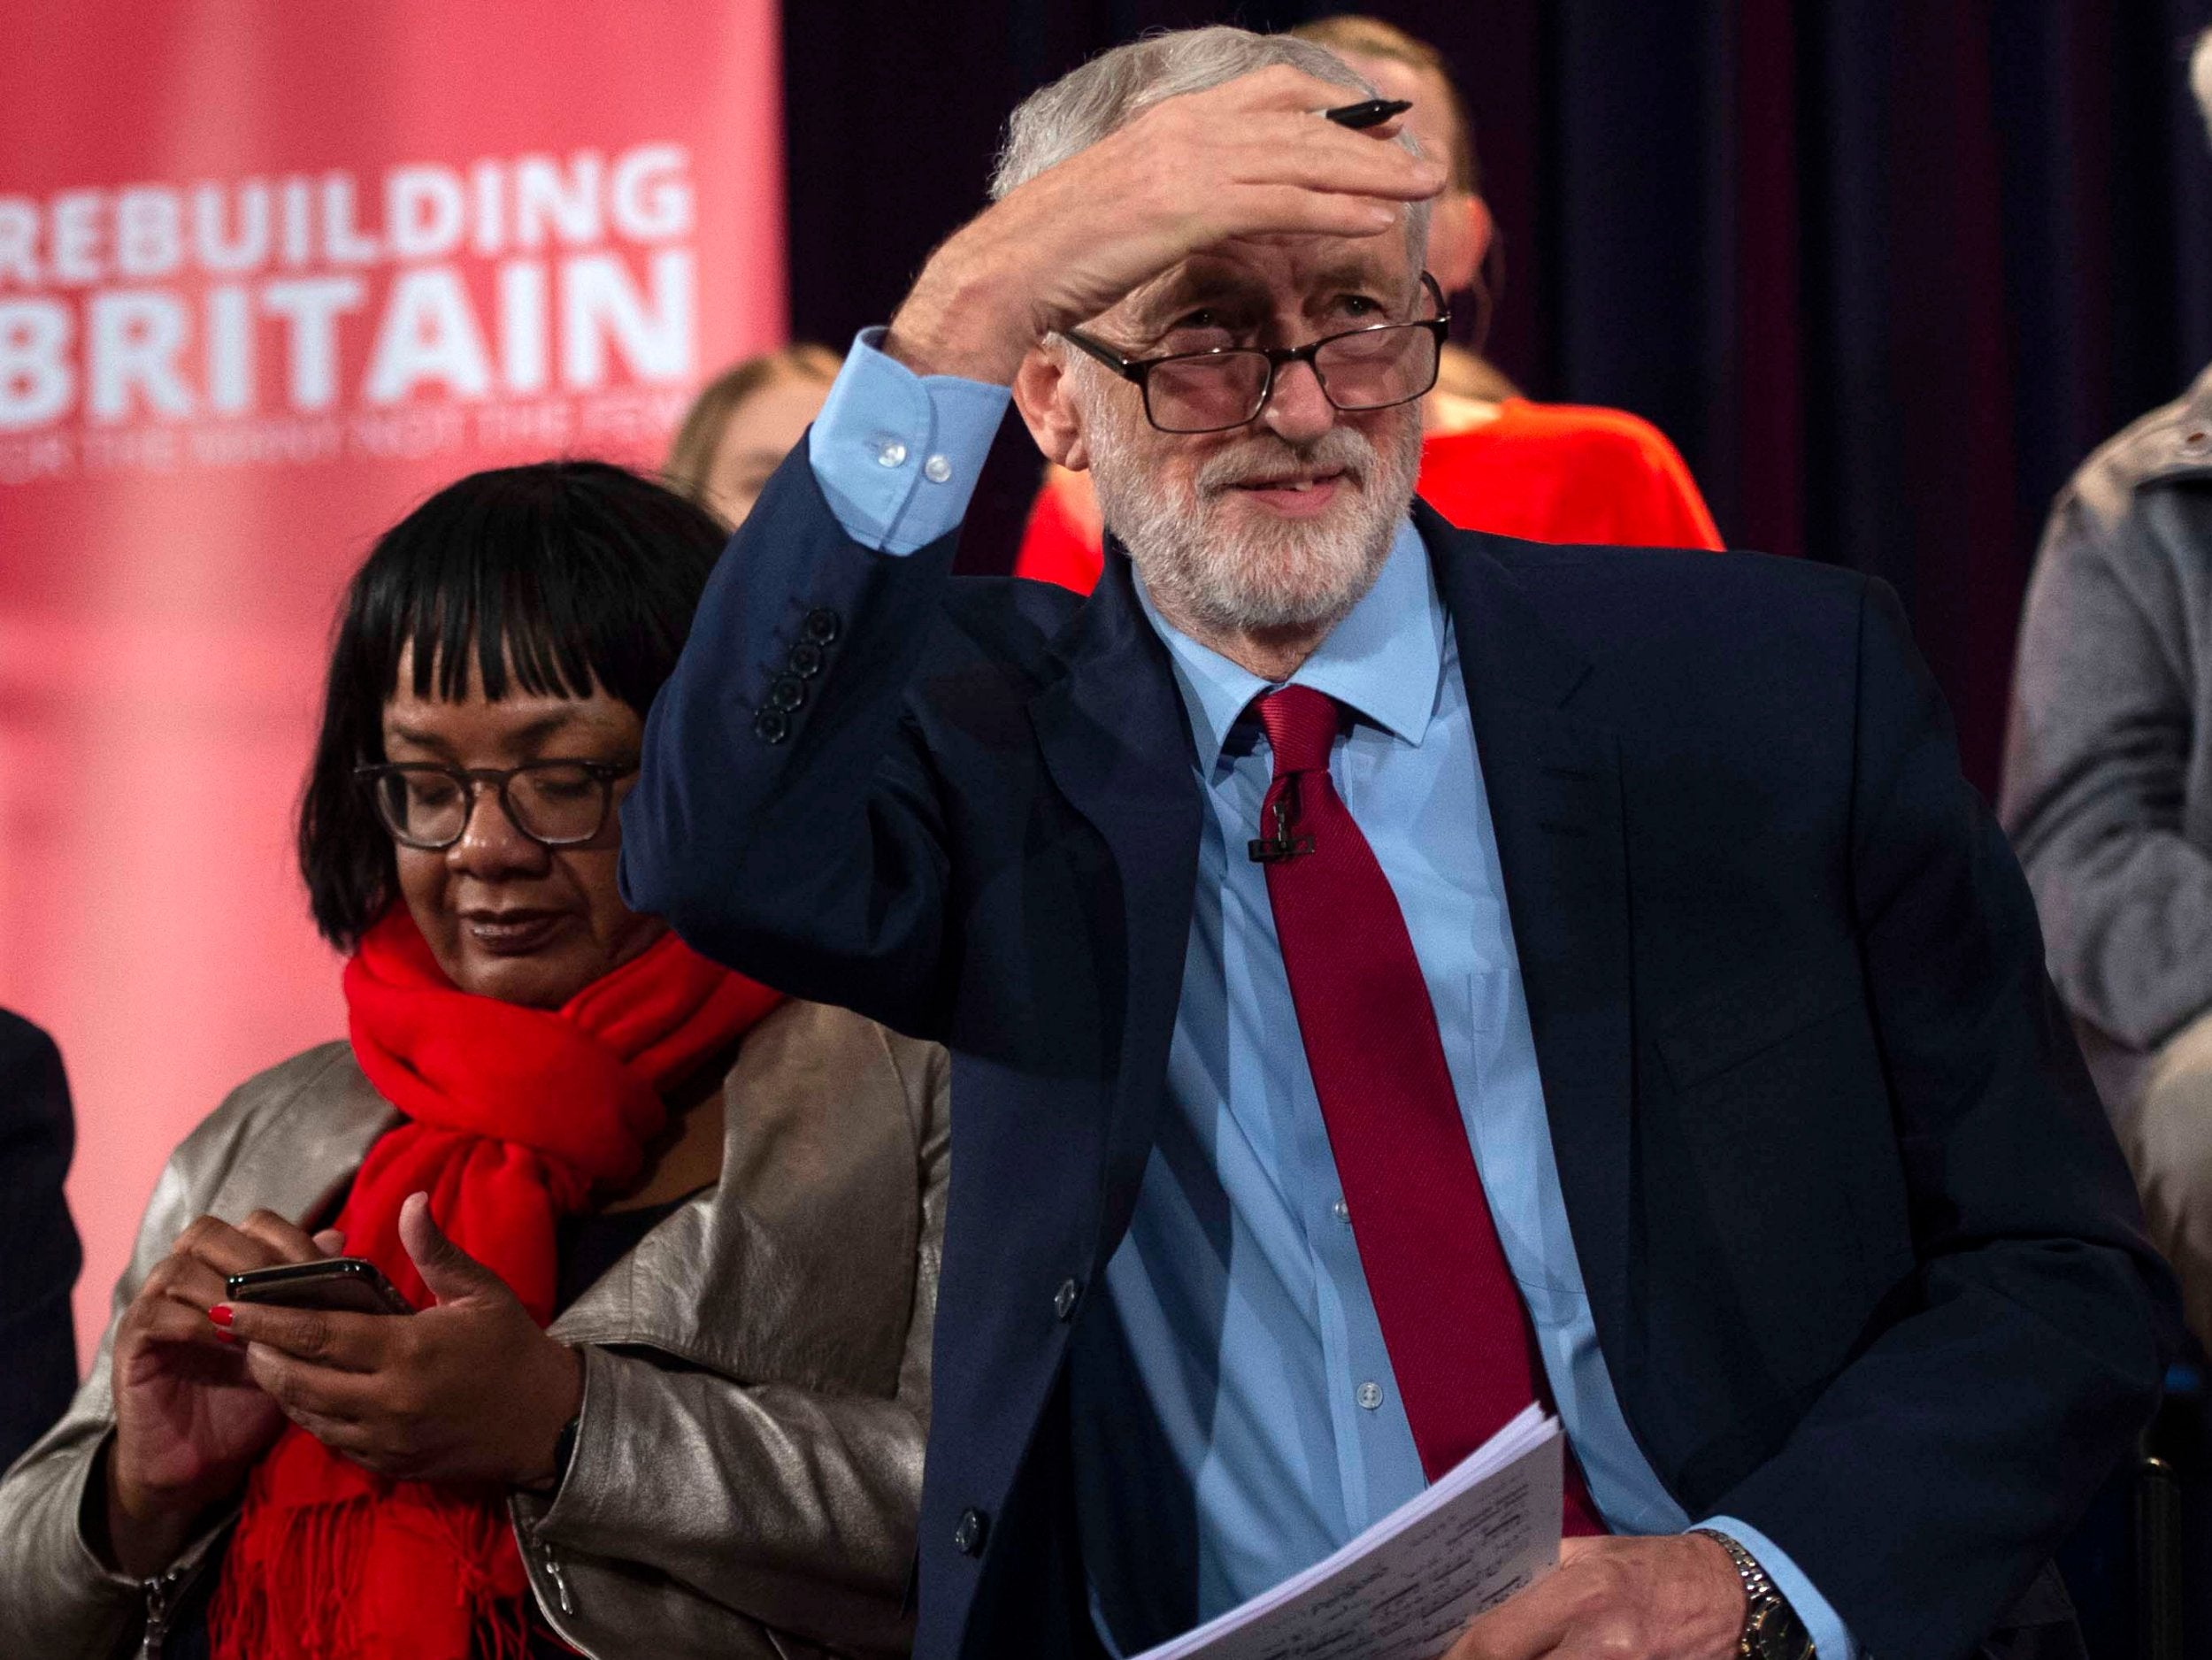 Can Labour find a compelling position on Brexit?